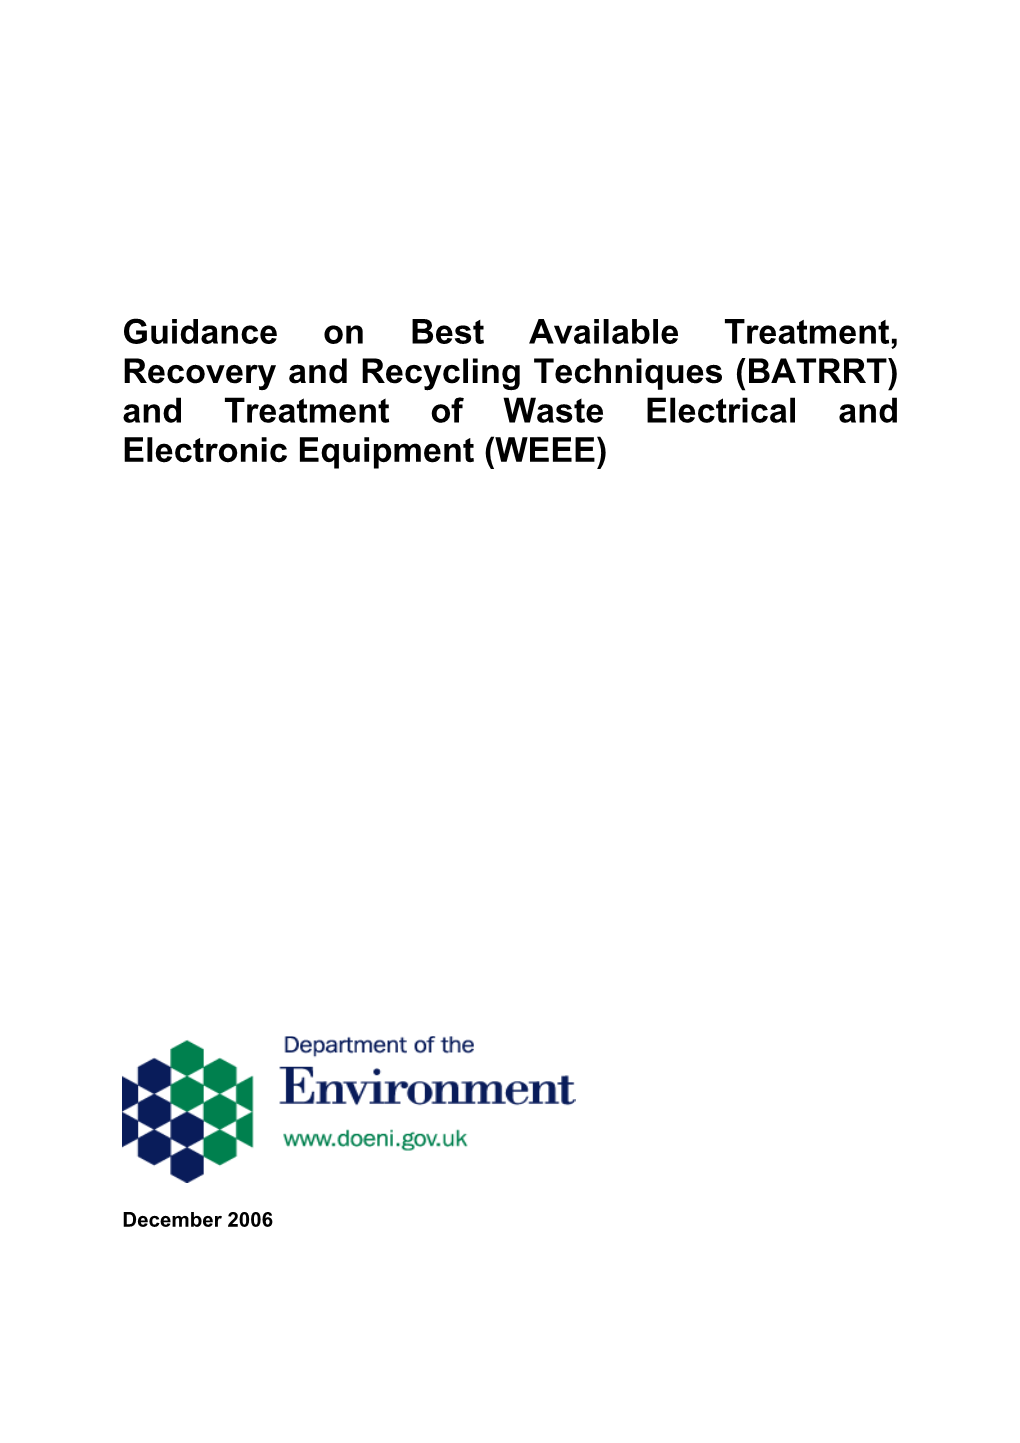 Guidance Documents for WEEE